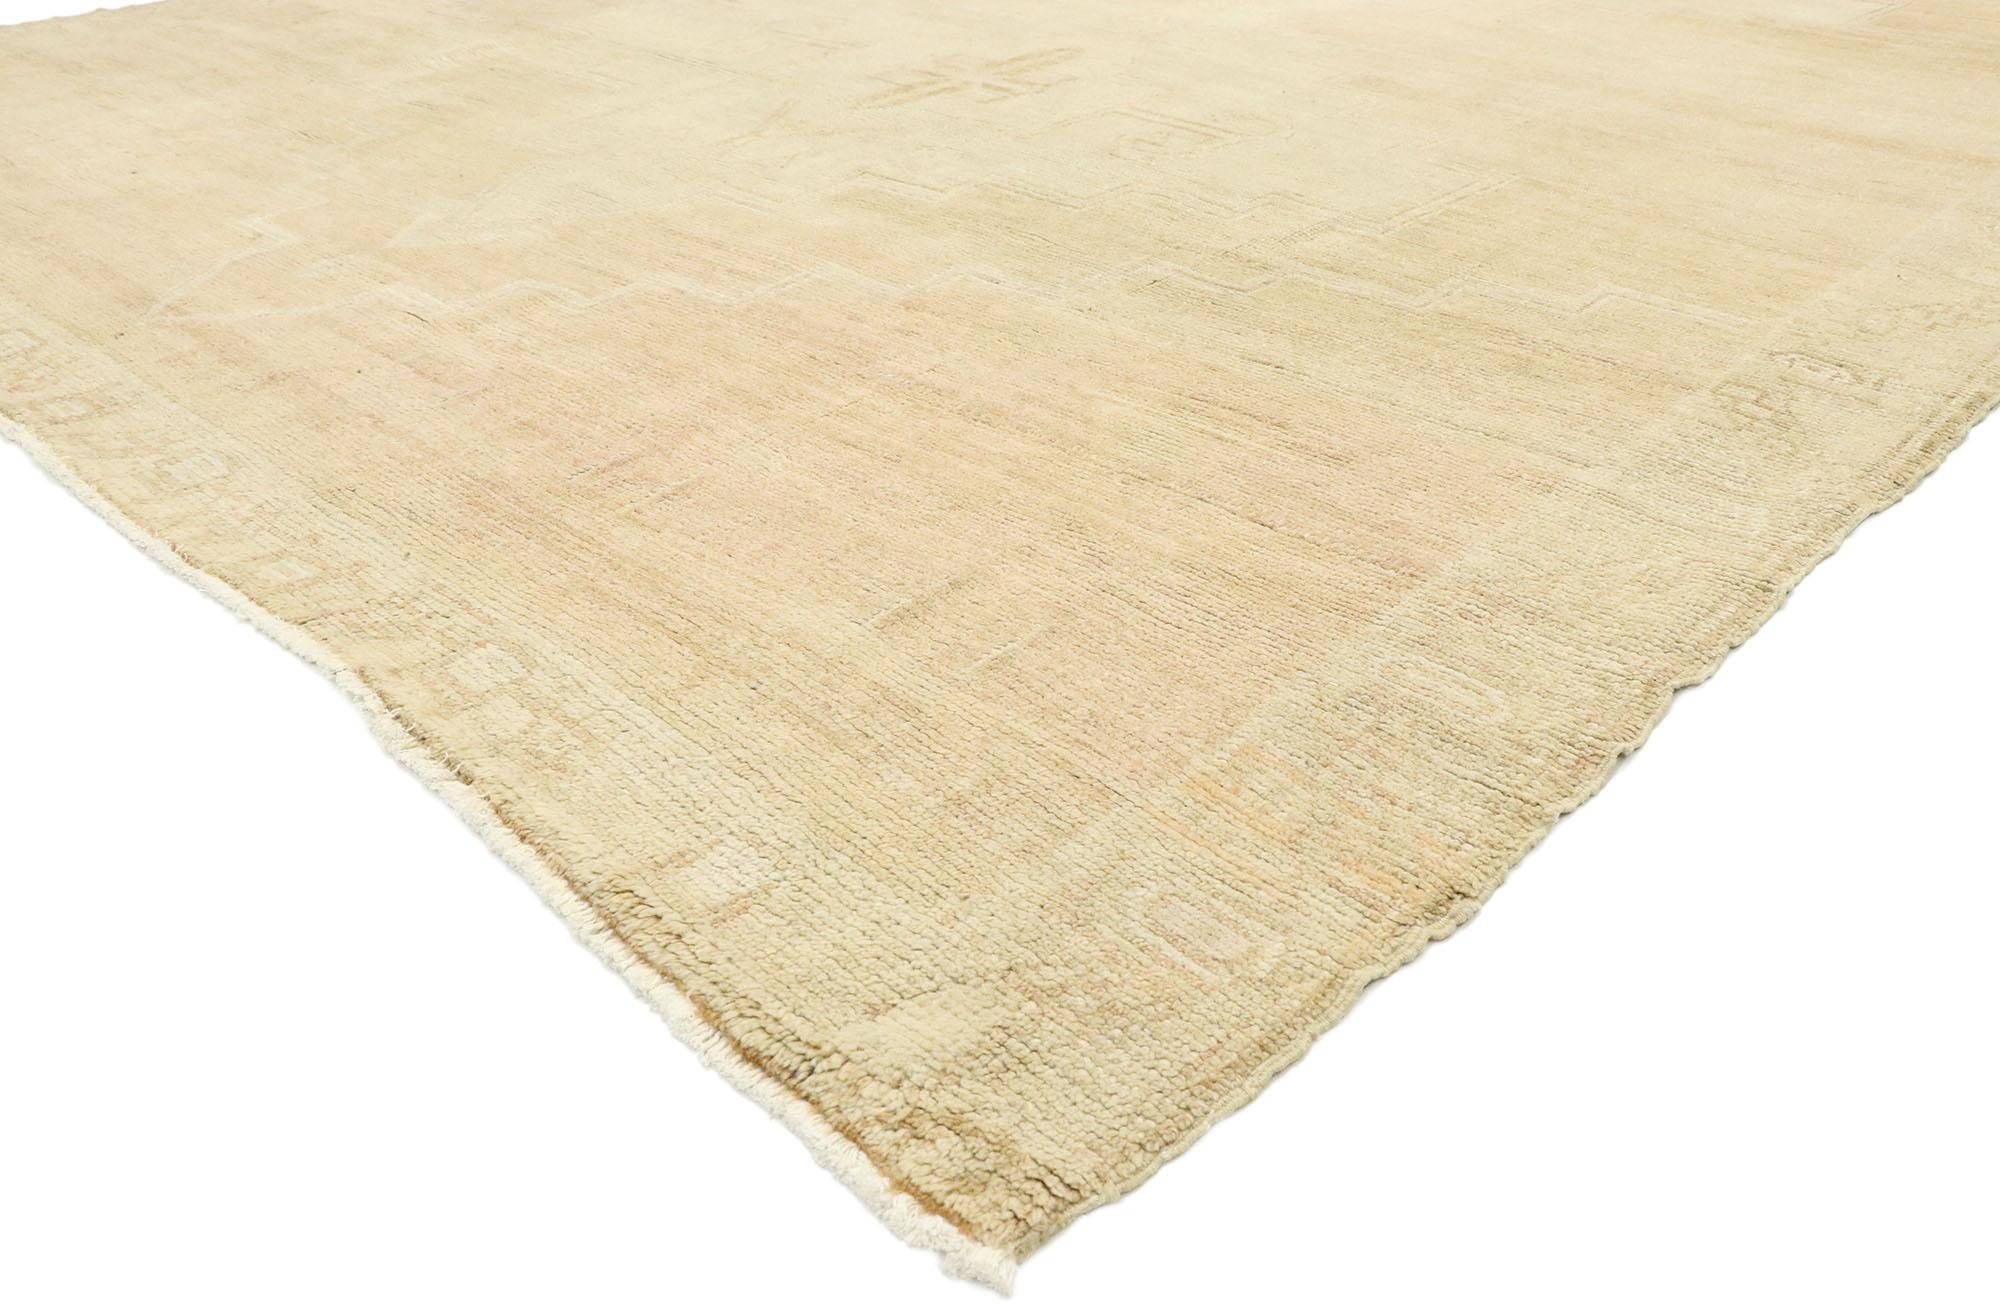 53037 vintage Turkish Oushak rug with Monochromatic Mission style. Effortless beauty and simplicity meet soft, bespoke vibes with a monochromatic Mission style in this hand knotted wool vintage Turkish Oushak rug. The abrashed cutout field features